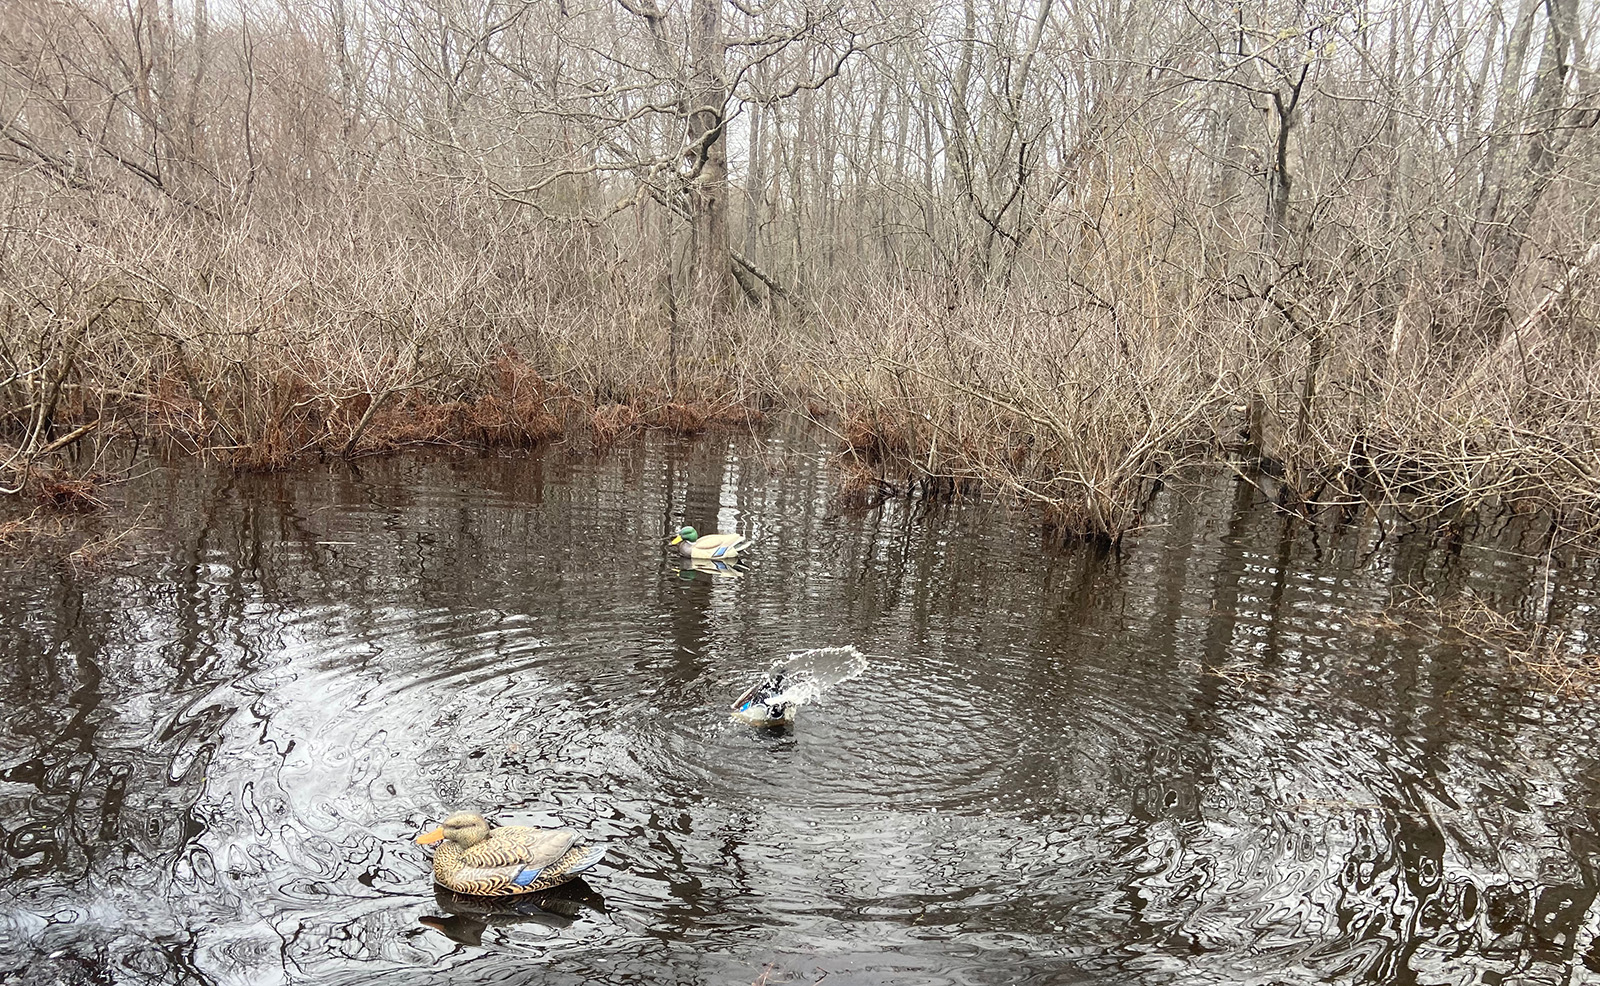 A photo of three duck decoys in a marsh, with ripples indicating that the decoys are moving in the water.